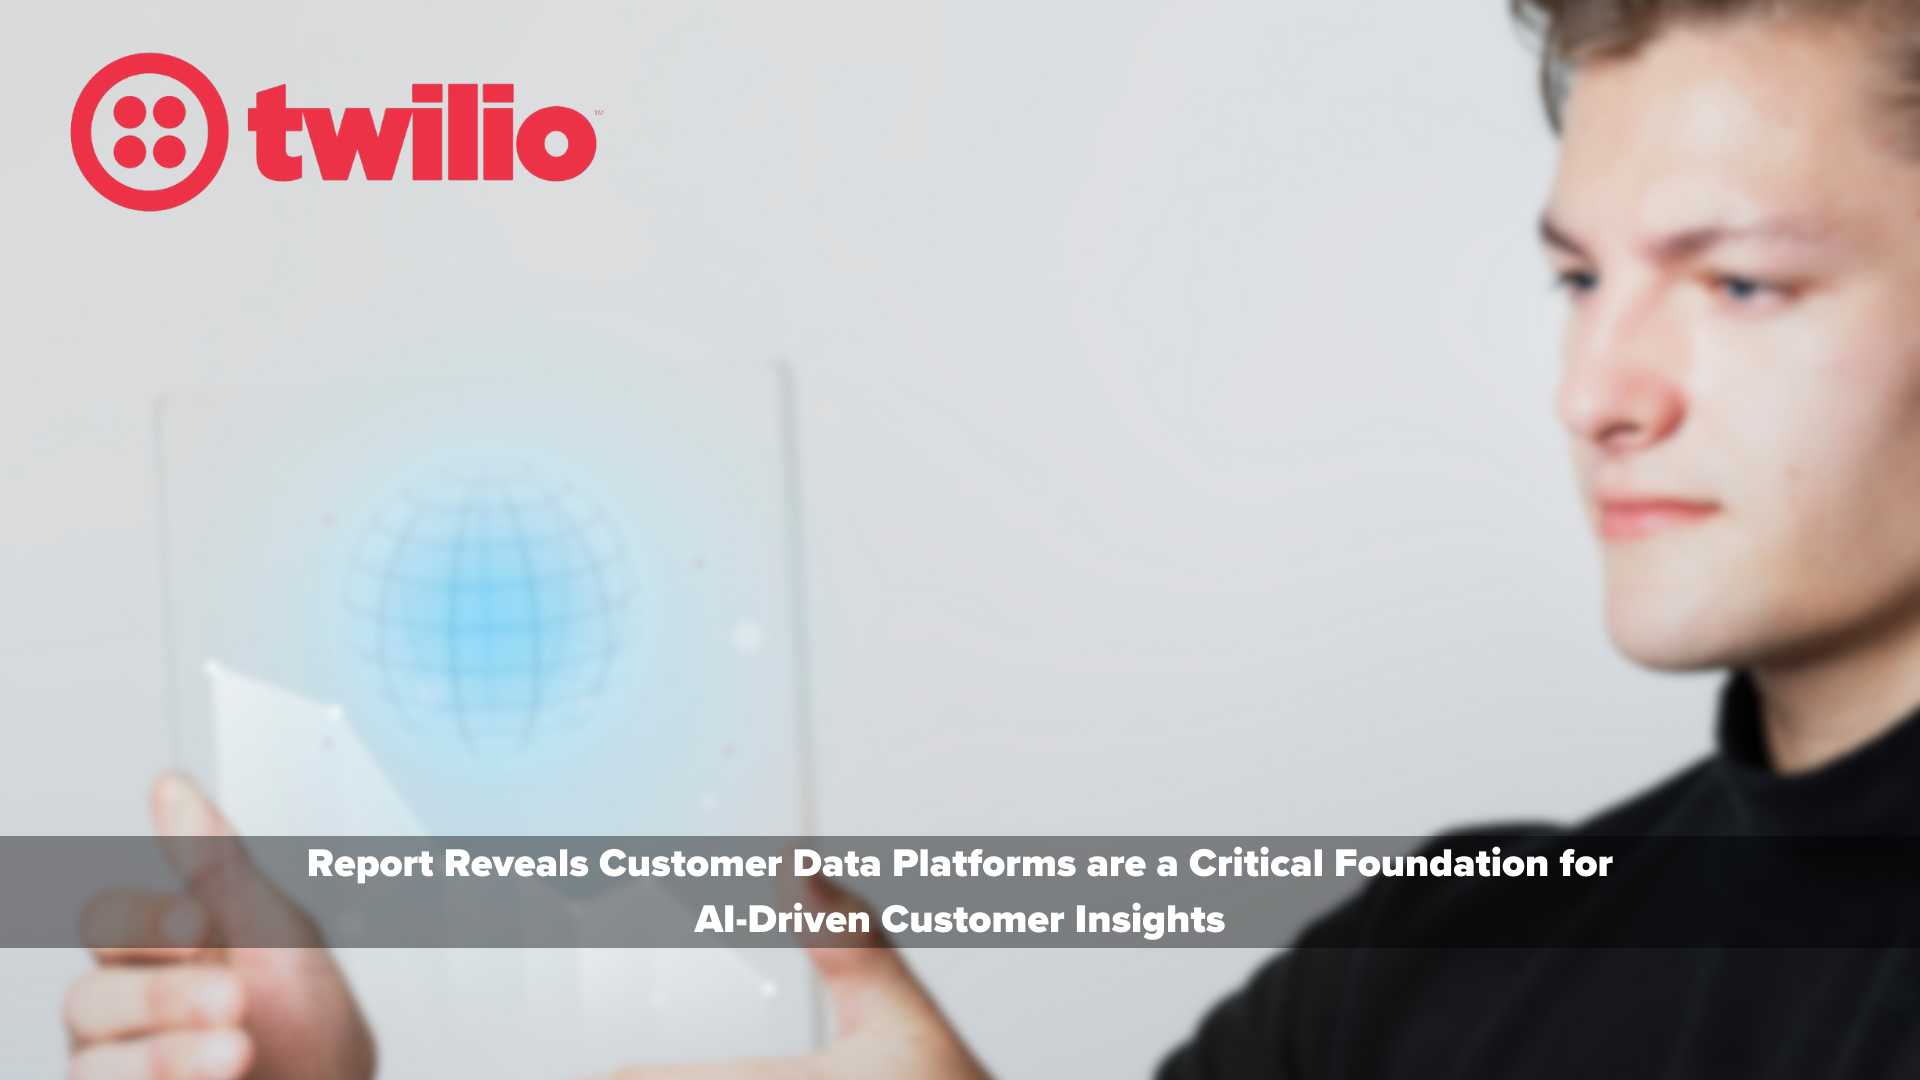 Twilio Report Reveals Customer Data Platforms are a Critical Foundation for AI-Driven Customer Insights